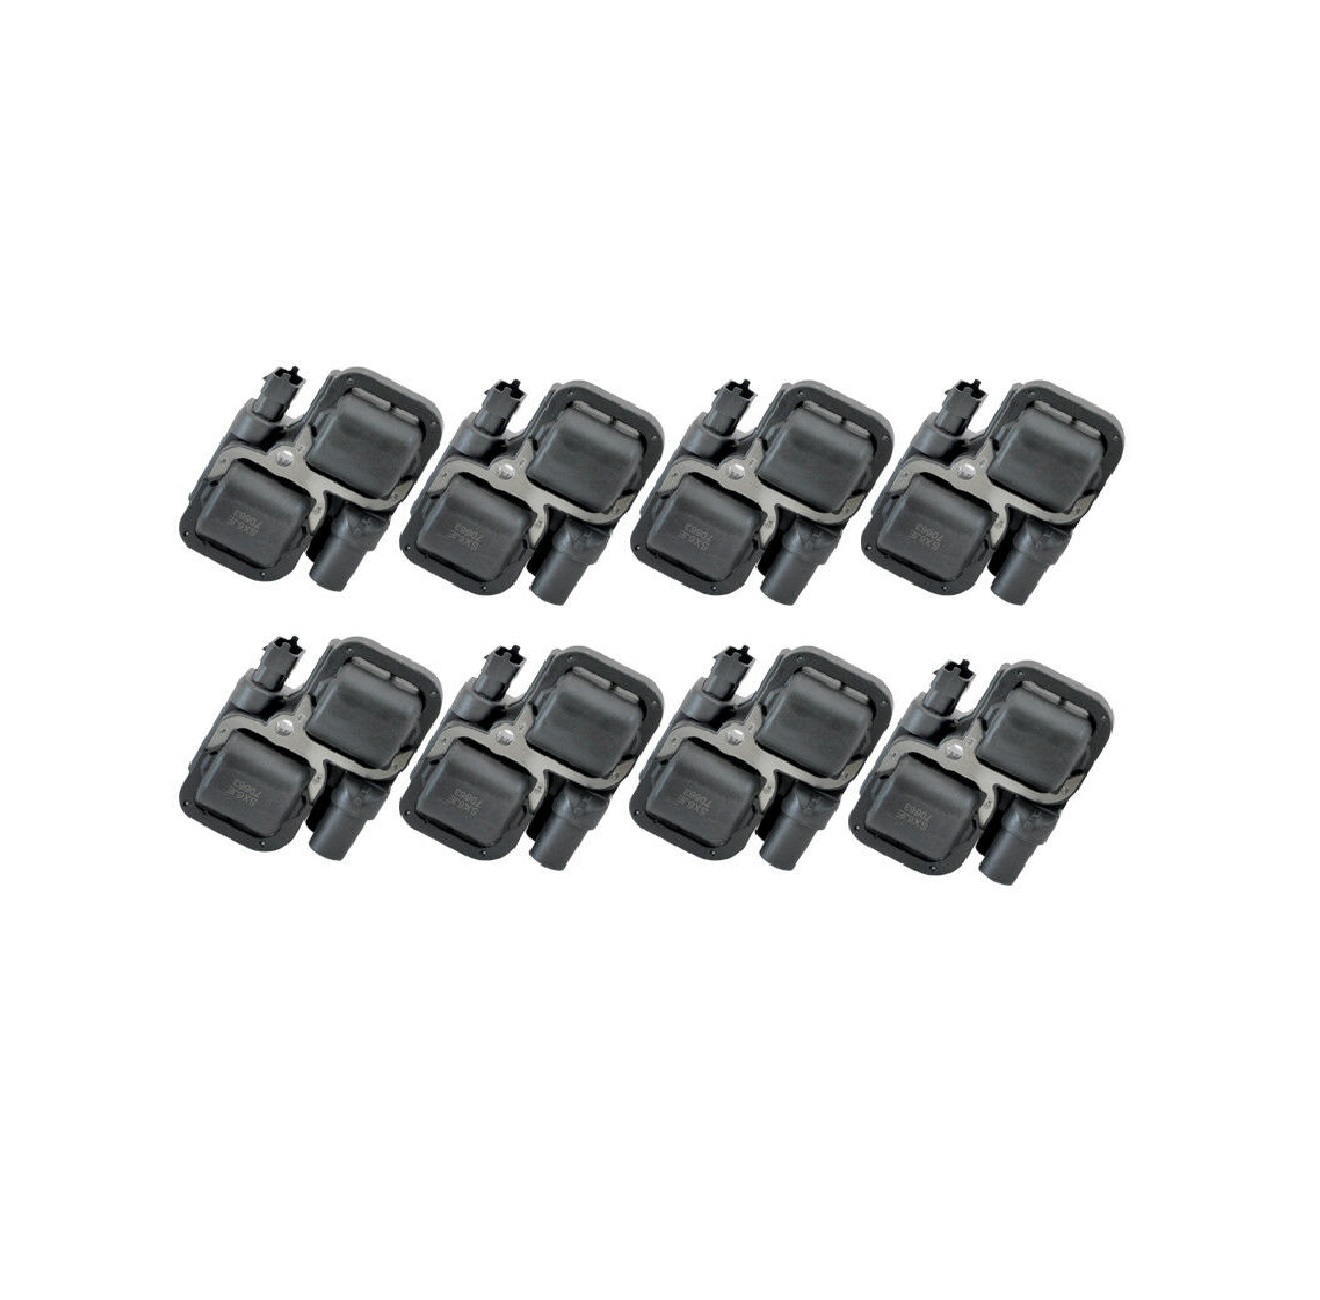 8x Ignition Coil for Mercedes C43 CLK55 CL55 CLS500 E500 E55 ML430 S55 SL500 German Made